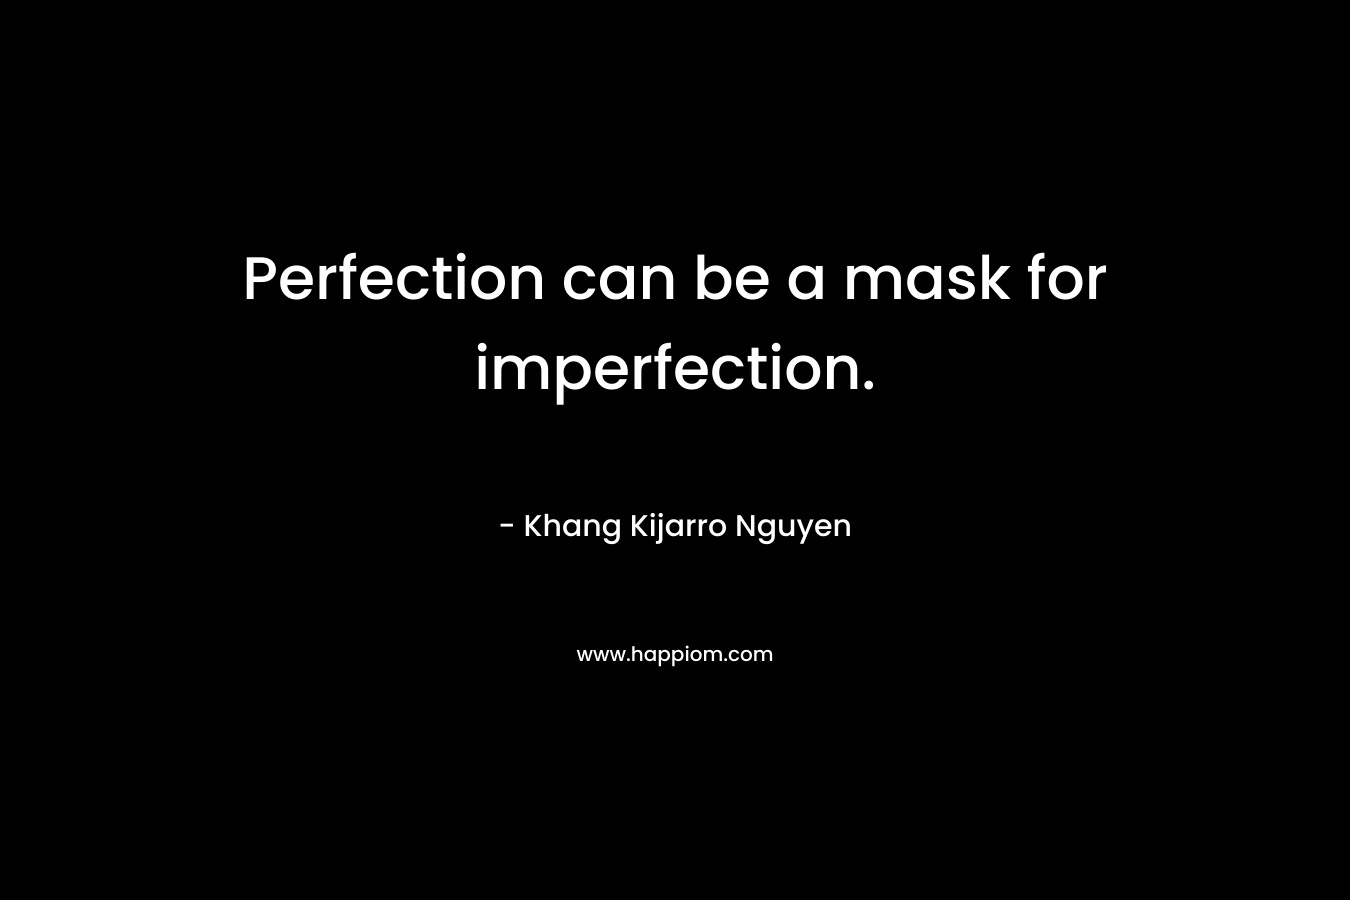 Perfection can be a mask for imperfection. – Khang Kijarro Nguyen